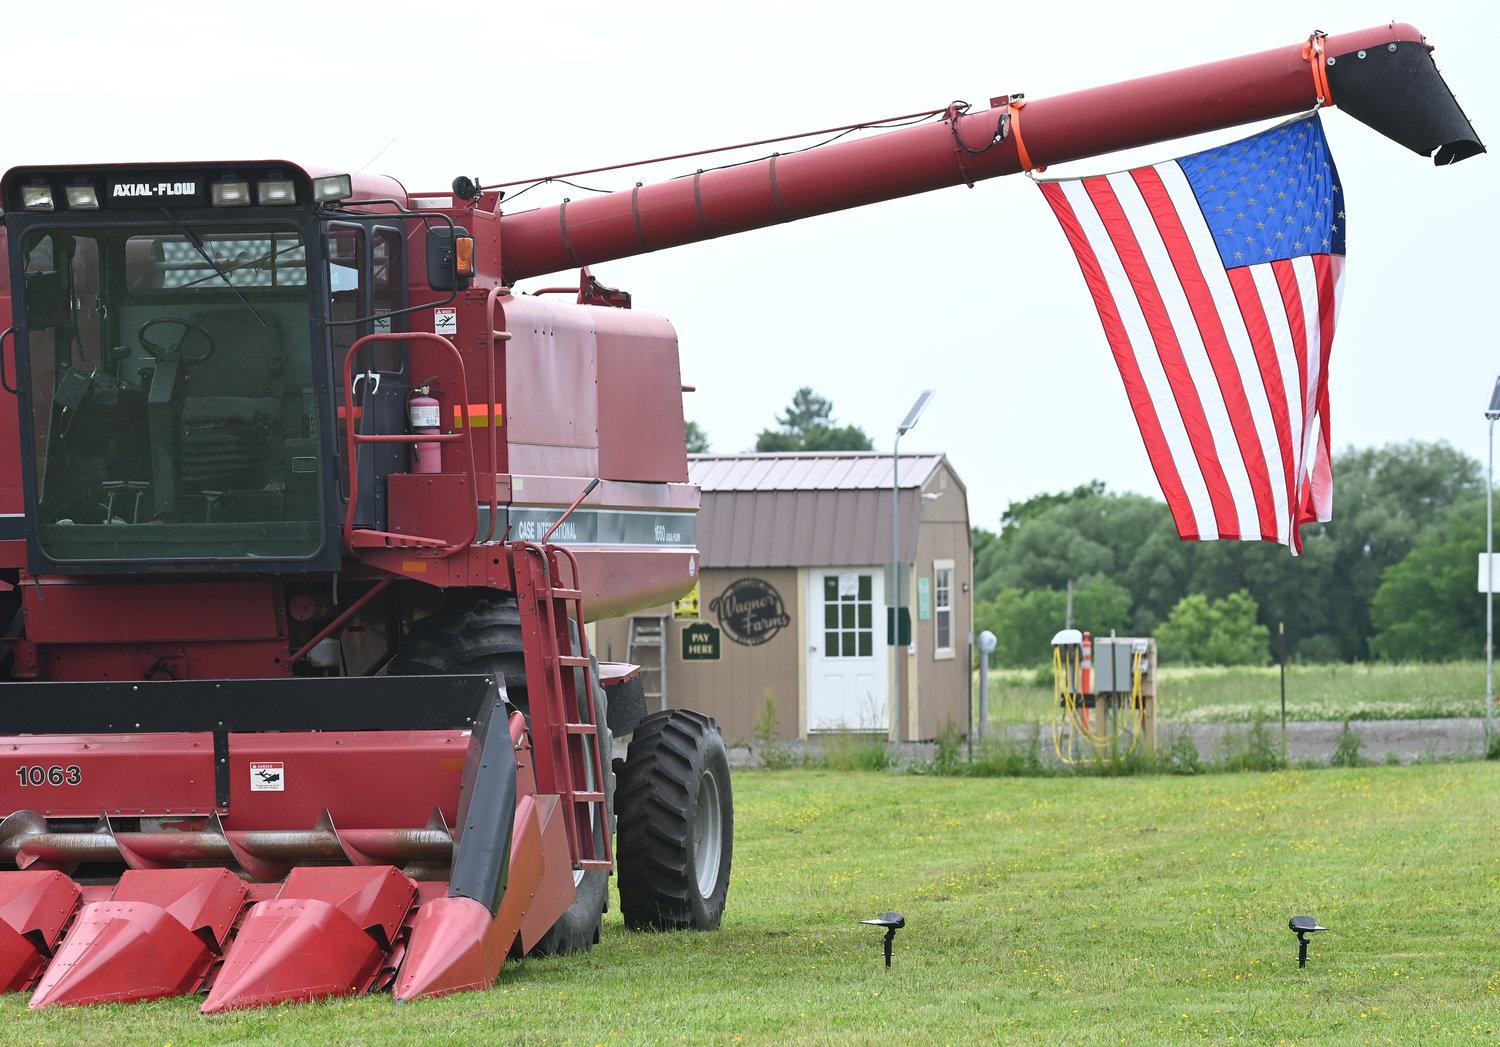 SHOWING PRIDE — An American flag is hung from a combine at Wagner Farms, 5841 Old Oneida Road, Rome, earlier this week.  The spring weather has been favorable for a host of different crops at the local agribusiness, with corn, potatoes and other vegetables thriving, according to Wagner Farm’s Facebook page.